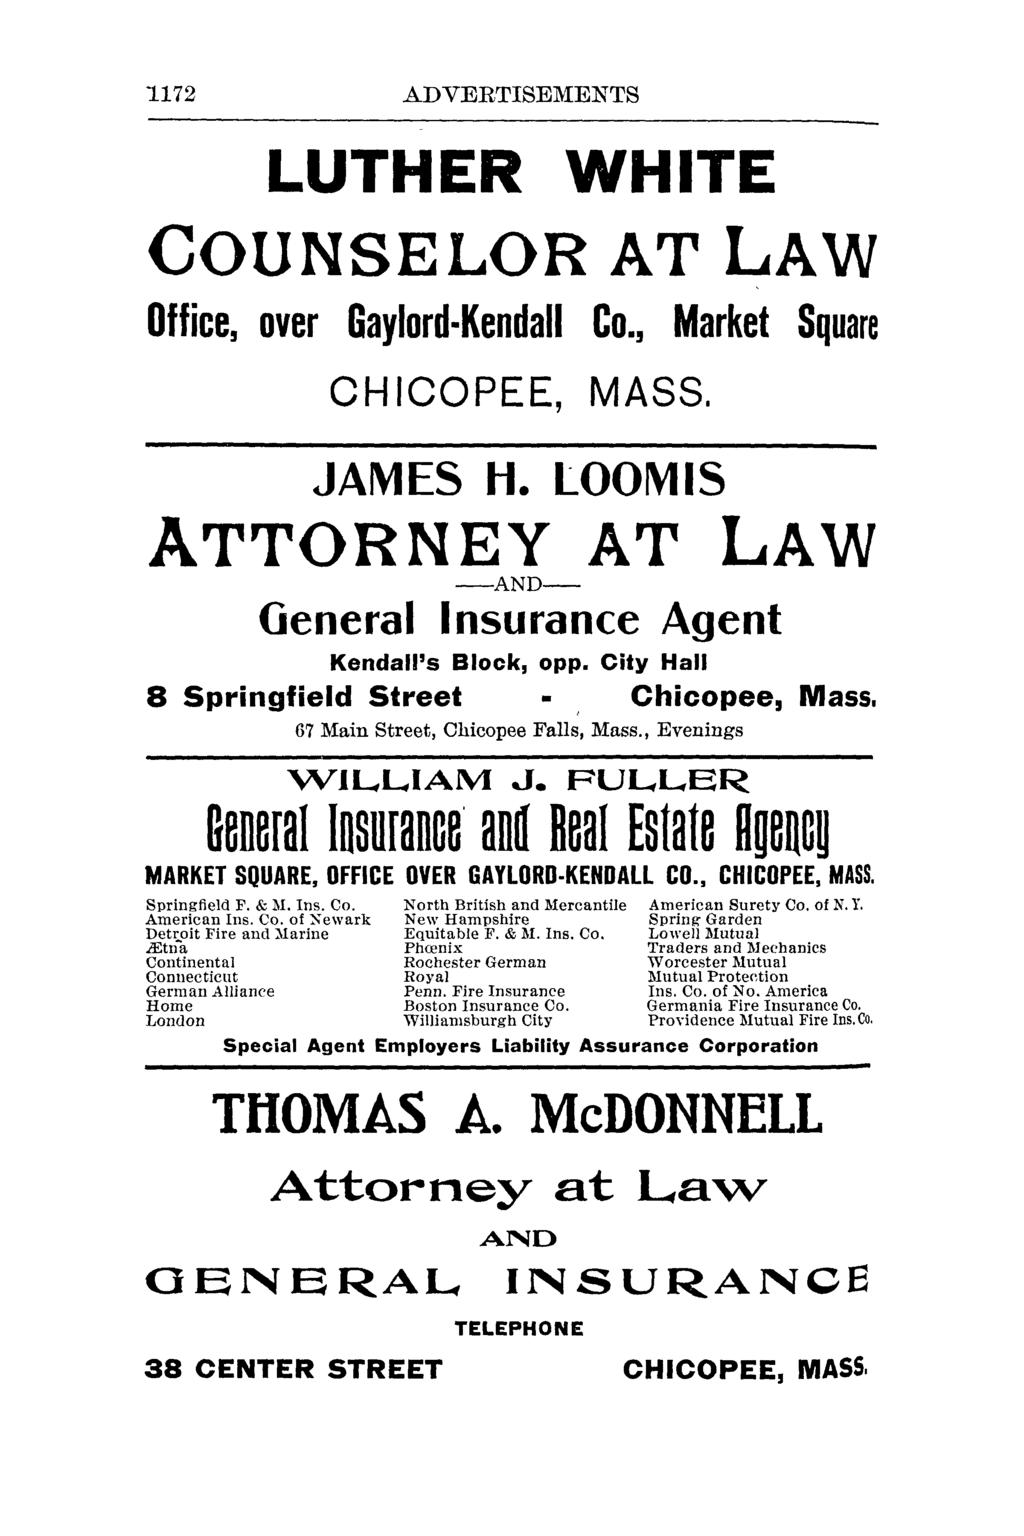 "1172 ADVERTISEMENTS LUTHER WHITE COUNSELOR AT LAW Office, over Gaylord-Kendall Co., Market Square CHICOPEE, MASS. JAMES H. LOOMIS ATTORNEY AT LAW -AND- General Insurance Agent Kendall's Block, 0pp.